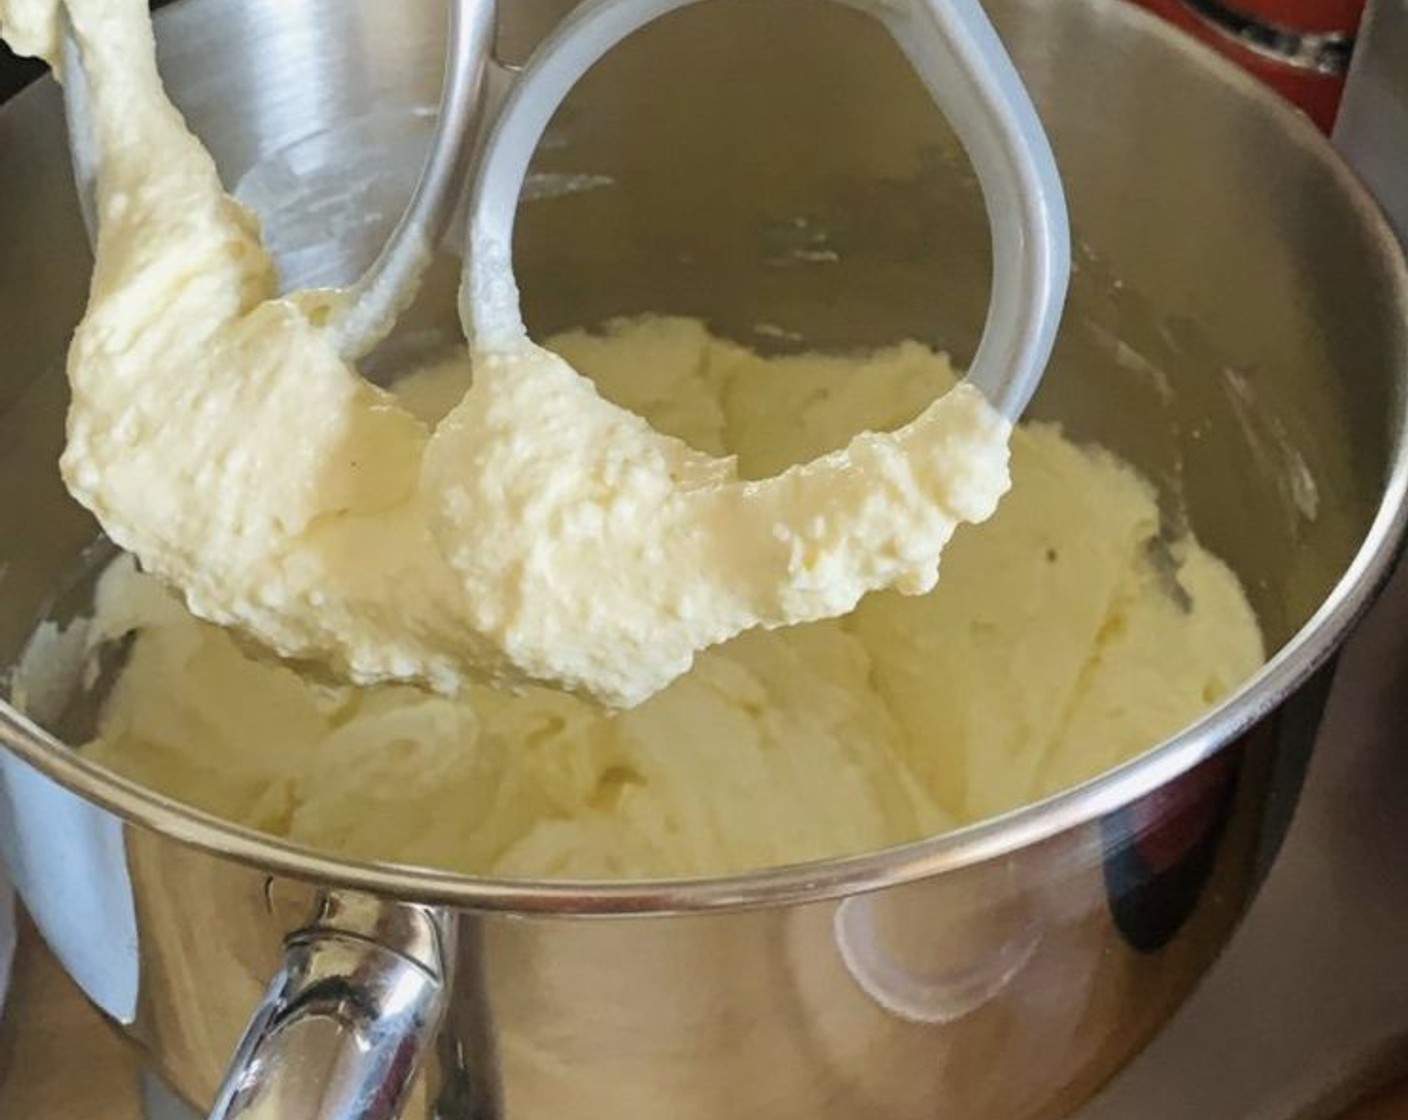 step 7 In a large bowl, whisk the Eggs (2), Brown Sugar (1/3 cup), Philadelphia Original Soft Cheese (2/3 cup), and Ricotta Cheese (1 3/4 cups) together until you get a smooth cream.